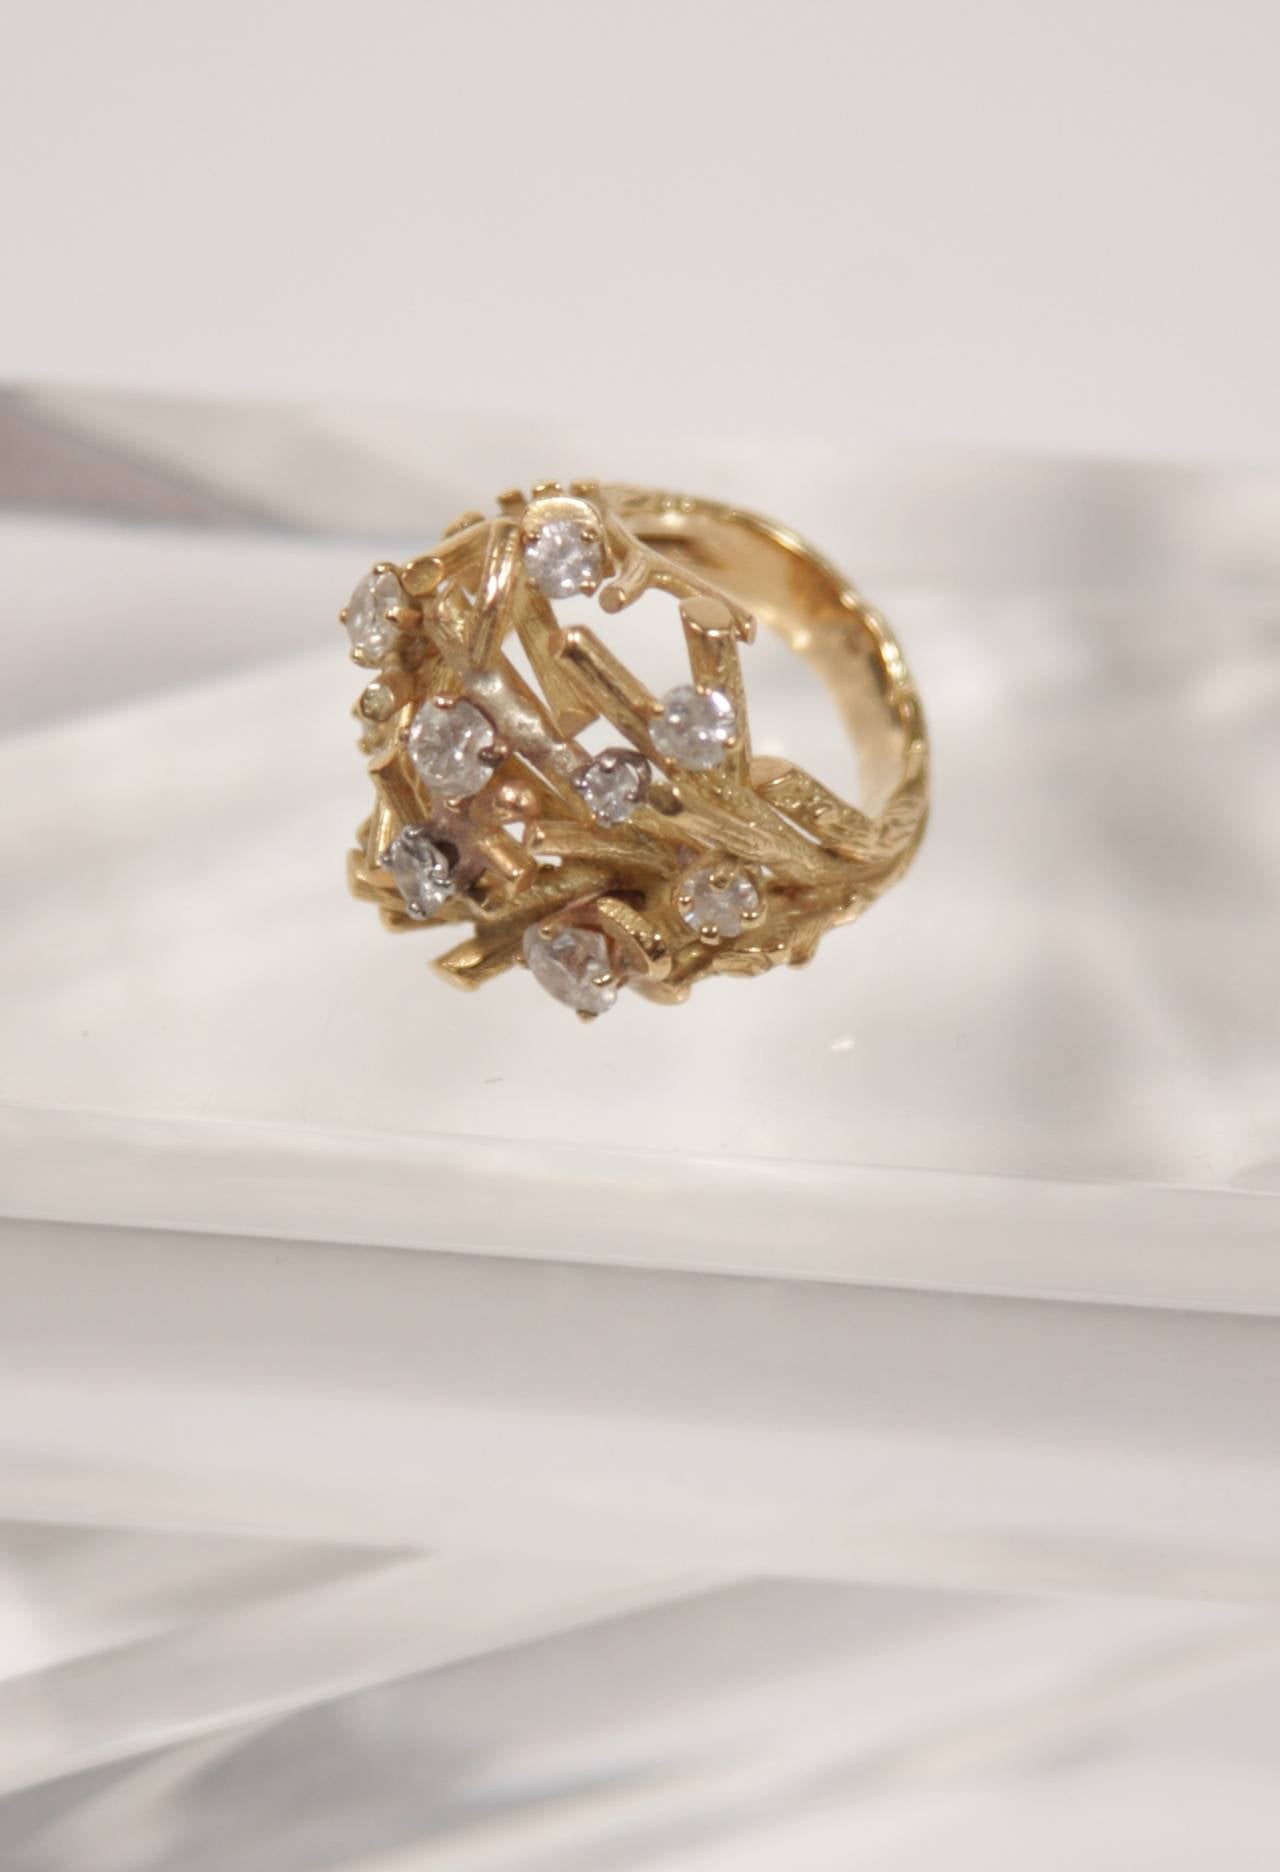 This beautiful ring is composed of a textured 18k gold adorned with diamonds. 
An absolutely effortlessly gorgeous 1970's piece.
The rind is quite substantial with a nice weight.
The Diamonds are all set as if being grasped by tree branches of 18K